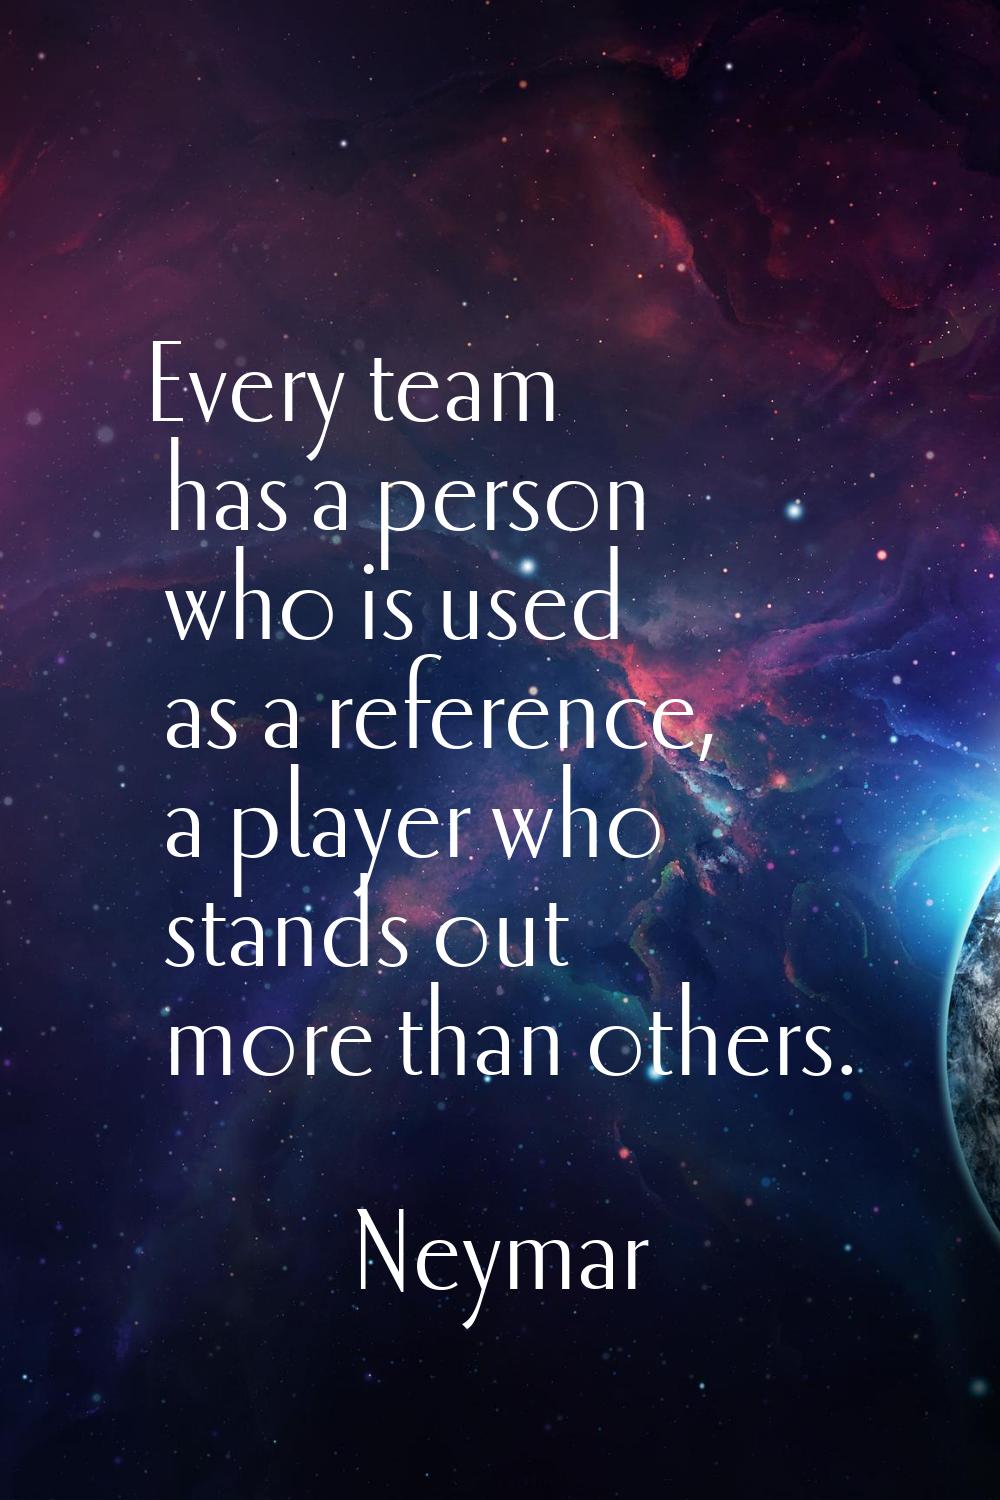 Every team has a person who is used as a reference, a player who stands out more than others.